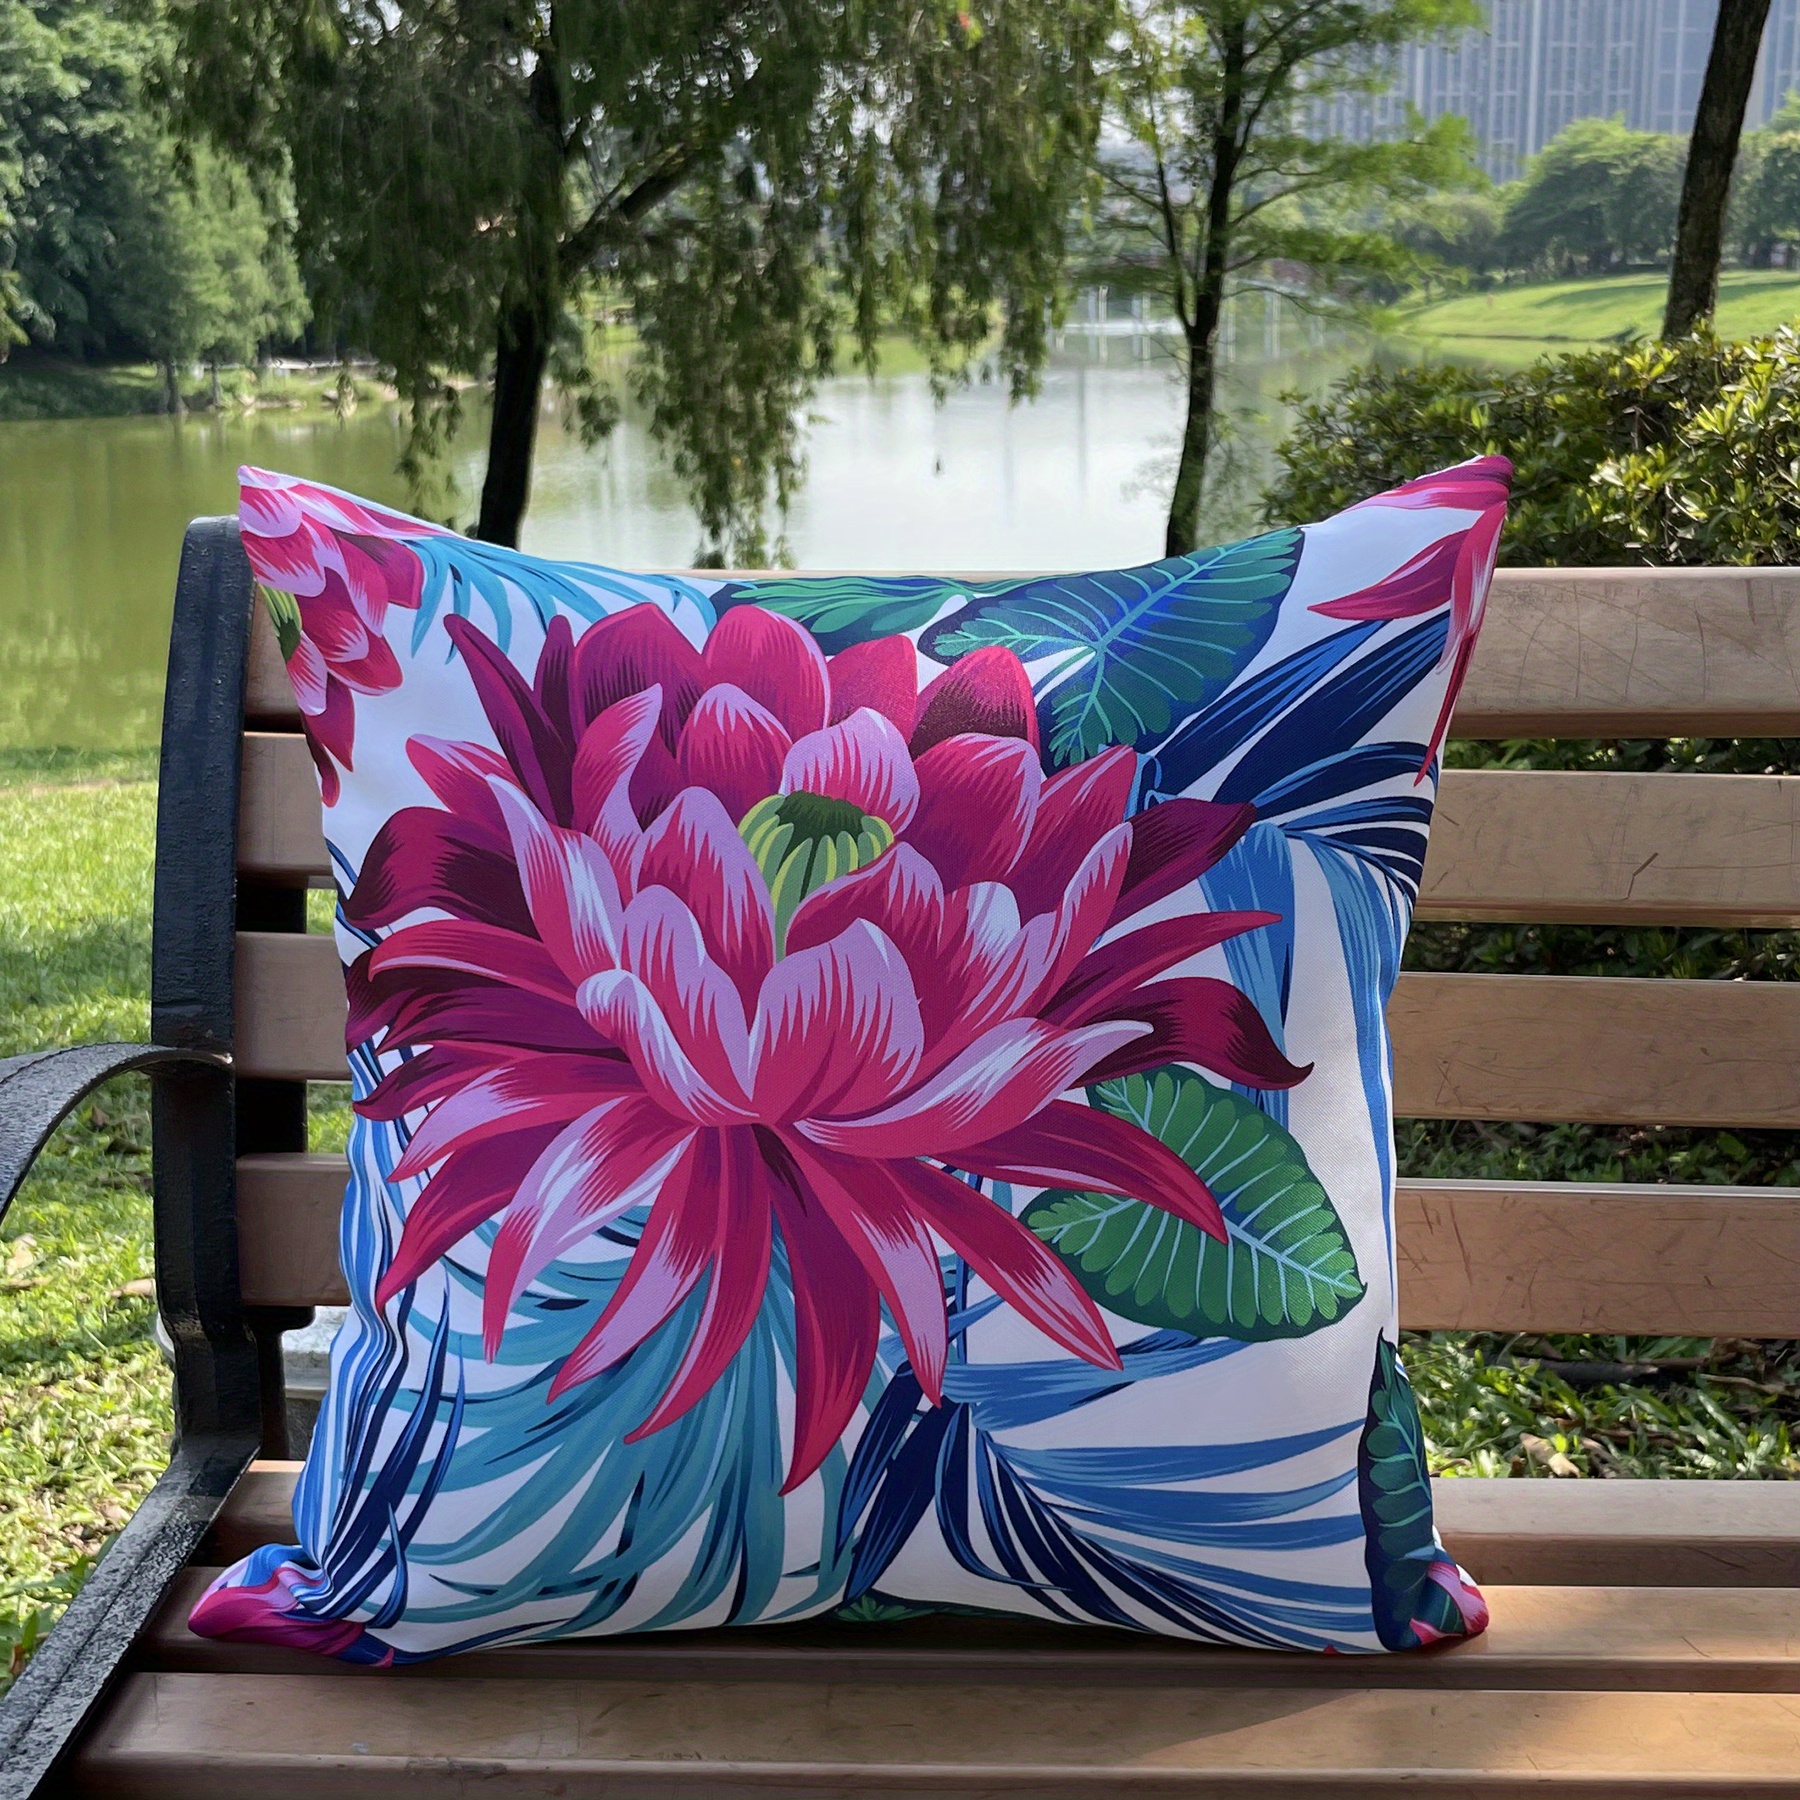 Outdoor Set of 4 Waterproof Throw Pillow Covers 18x18 Inches, Pink